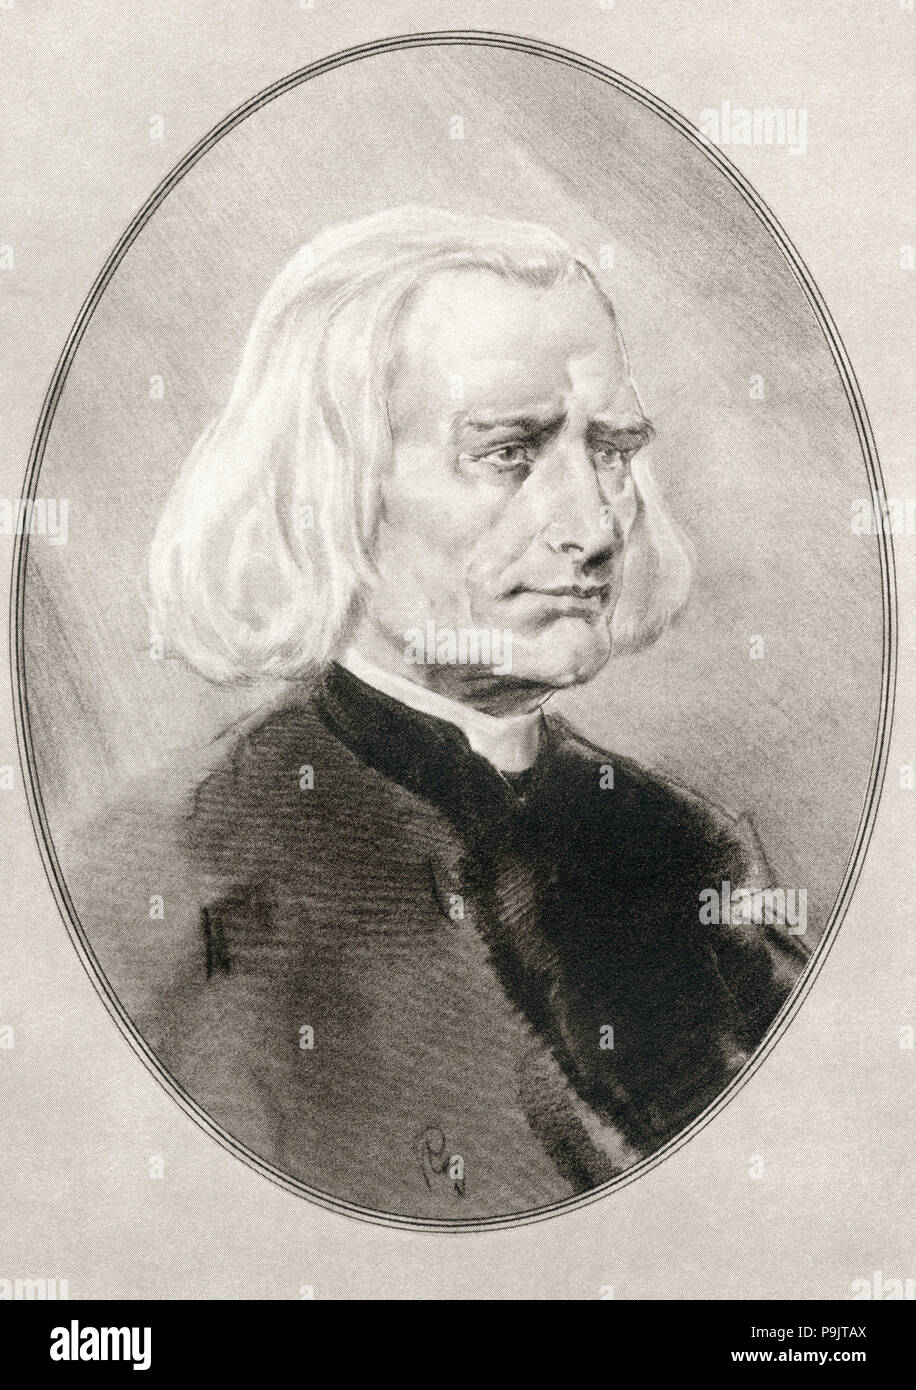 Franz Liszt, 1811 – 1886.  Hungarian composer, virtuoso pianist, conductor, music teacher, arranger, organist, philanthropist, author, nationalist and a Franciscan tertiary.  Illustration by Gordon Ross, American artist and illustrator (1873-1946), from Living Biographies of Great Composers. Stock Photo